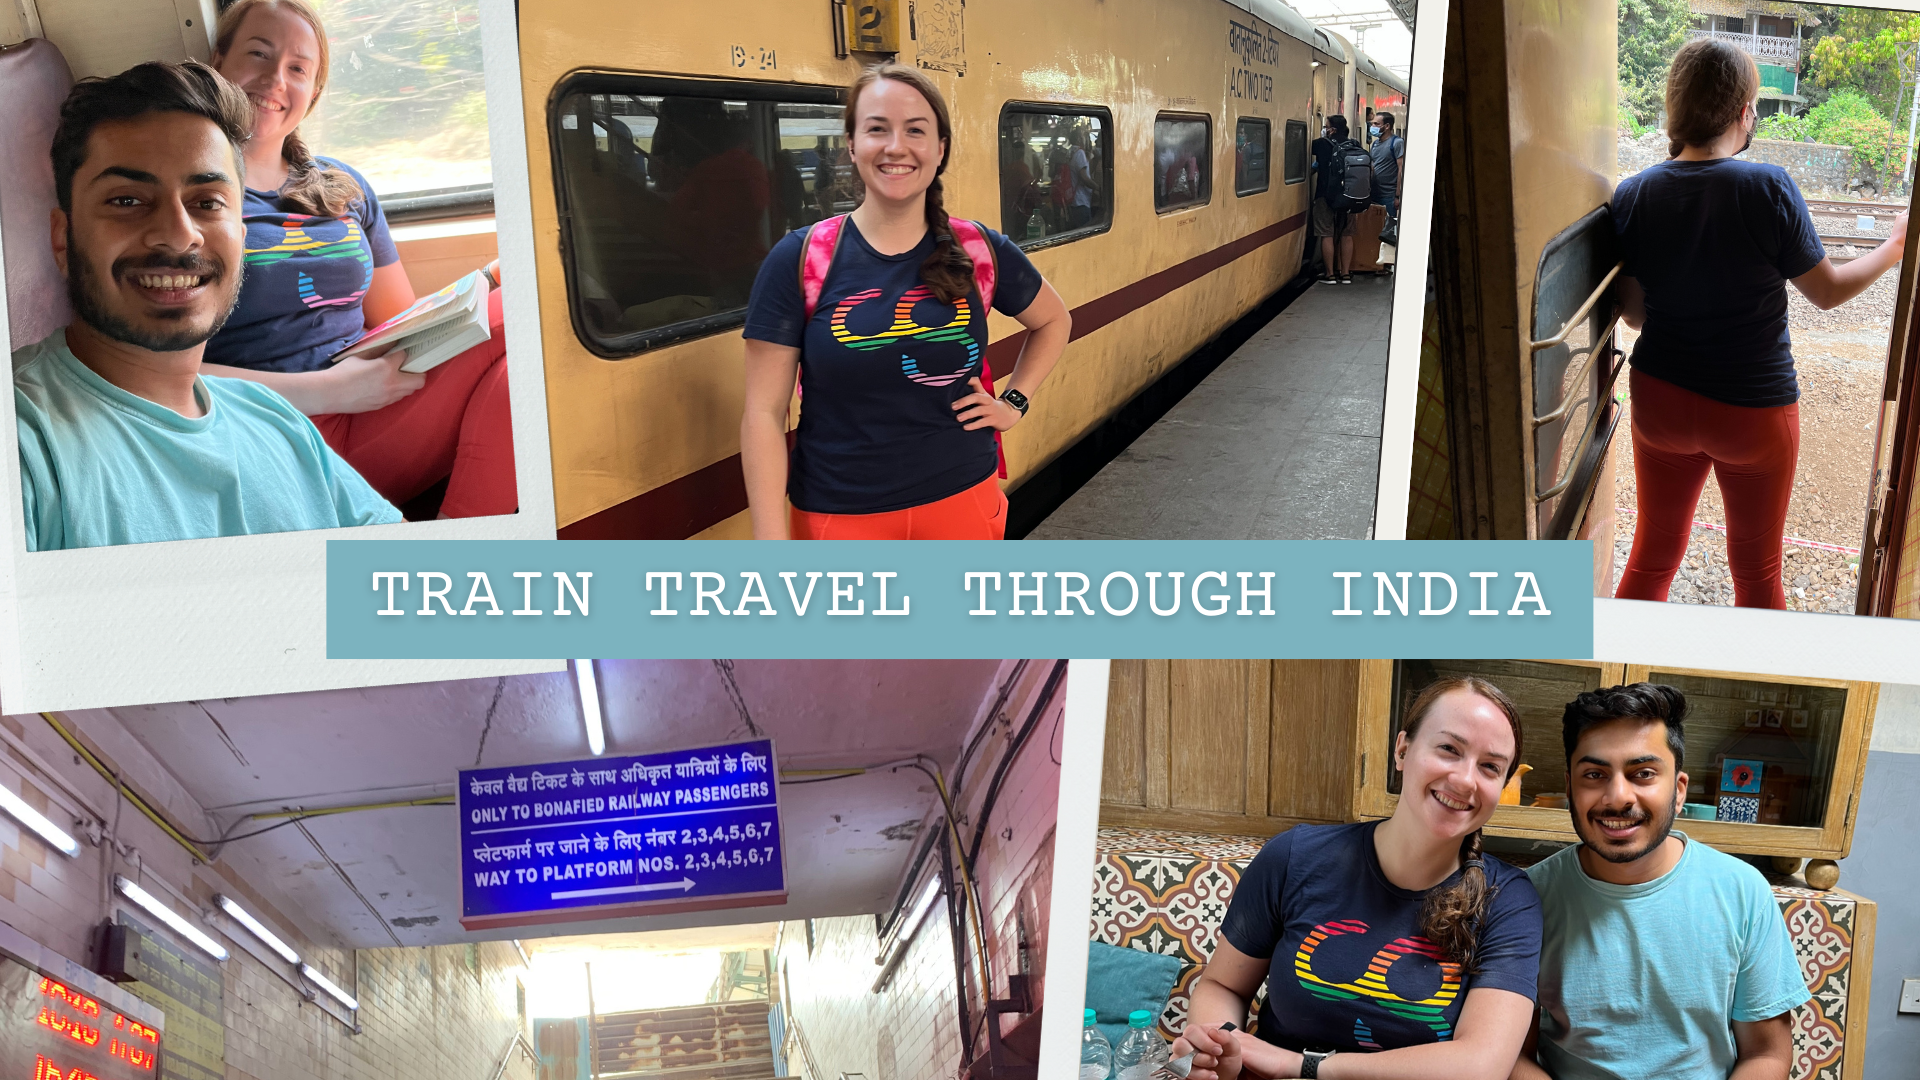 India Trip: Day 7 – Traveling by Train to Vadodara, Gujarat, India (March 20th, 2022)